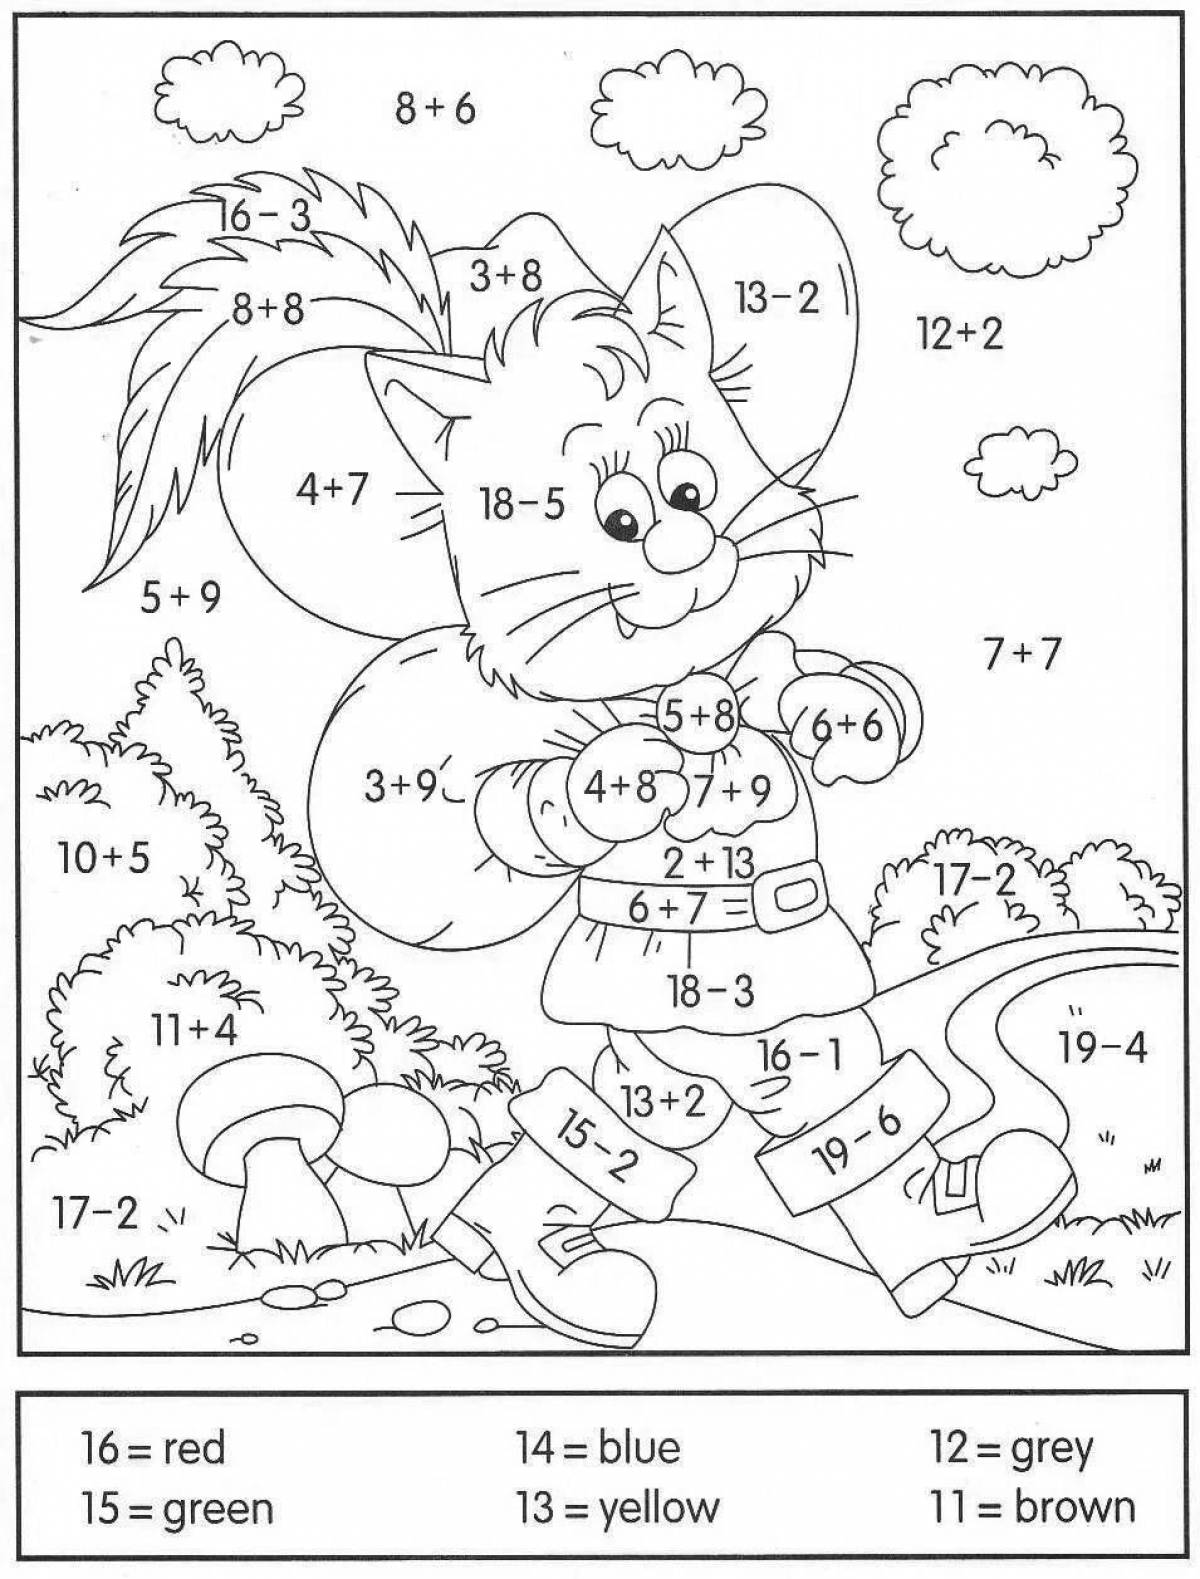 Colour coloring 2nd grade by numbers